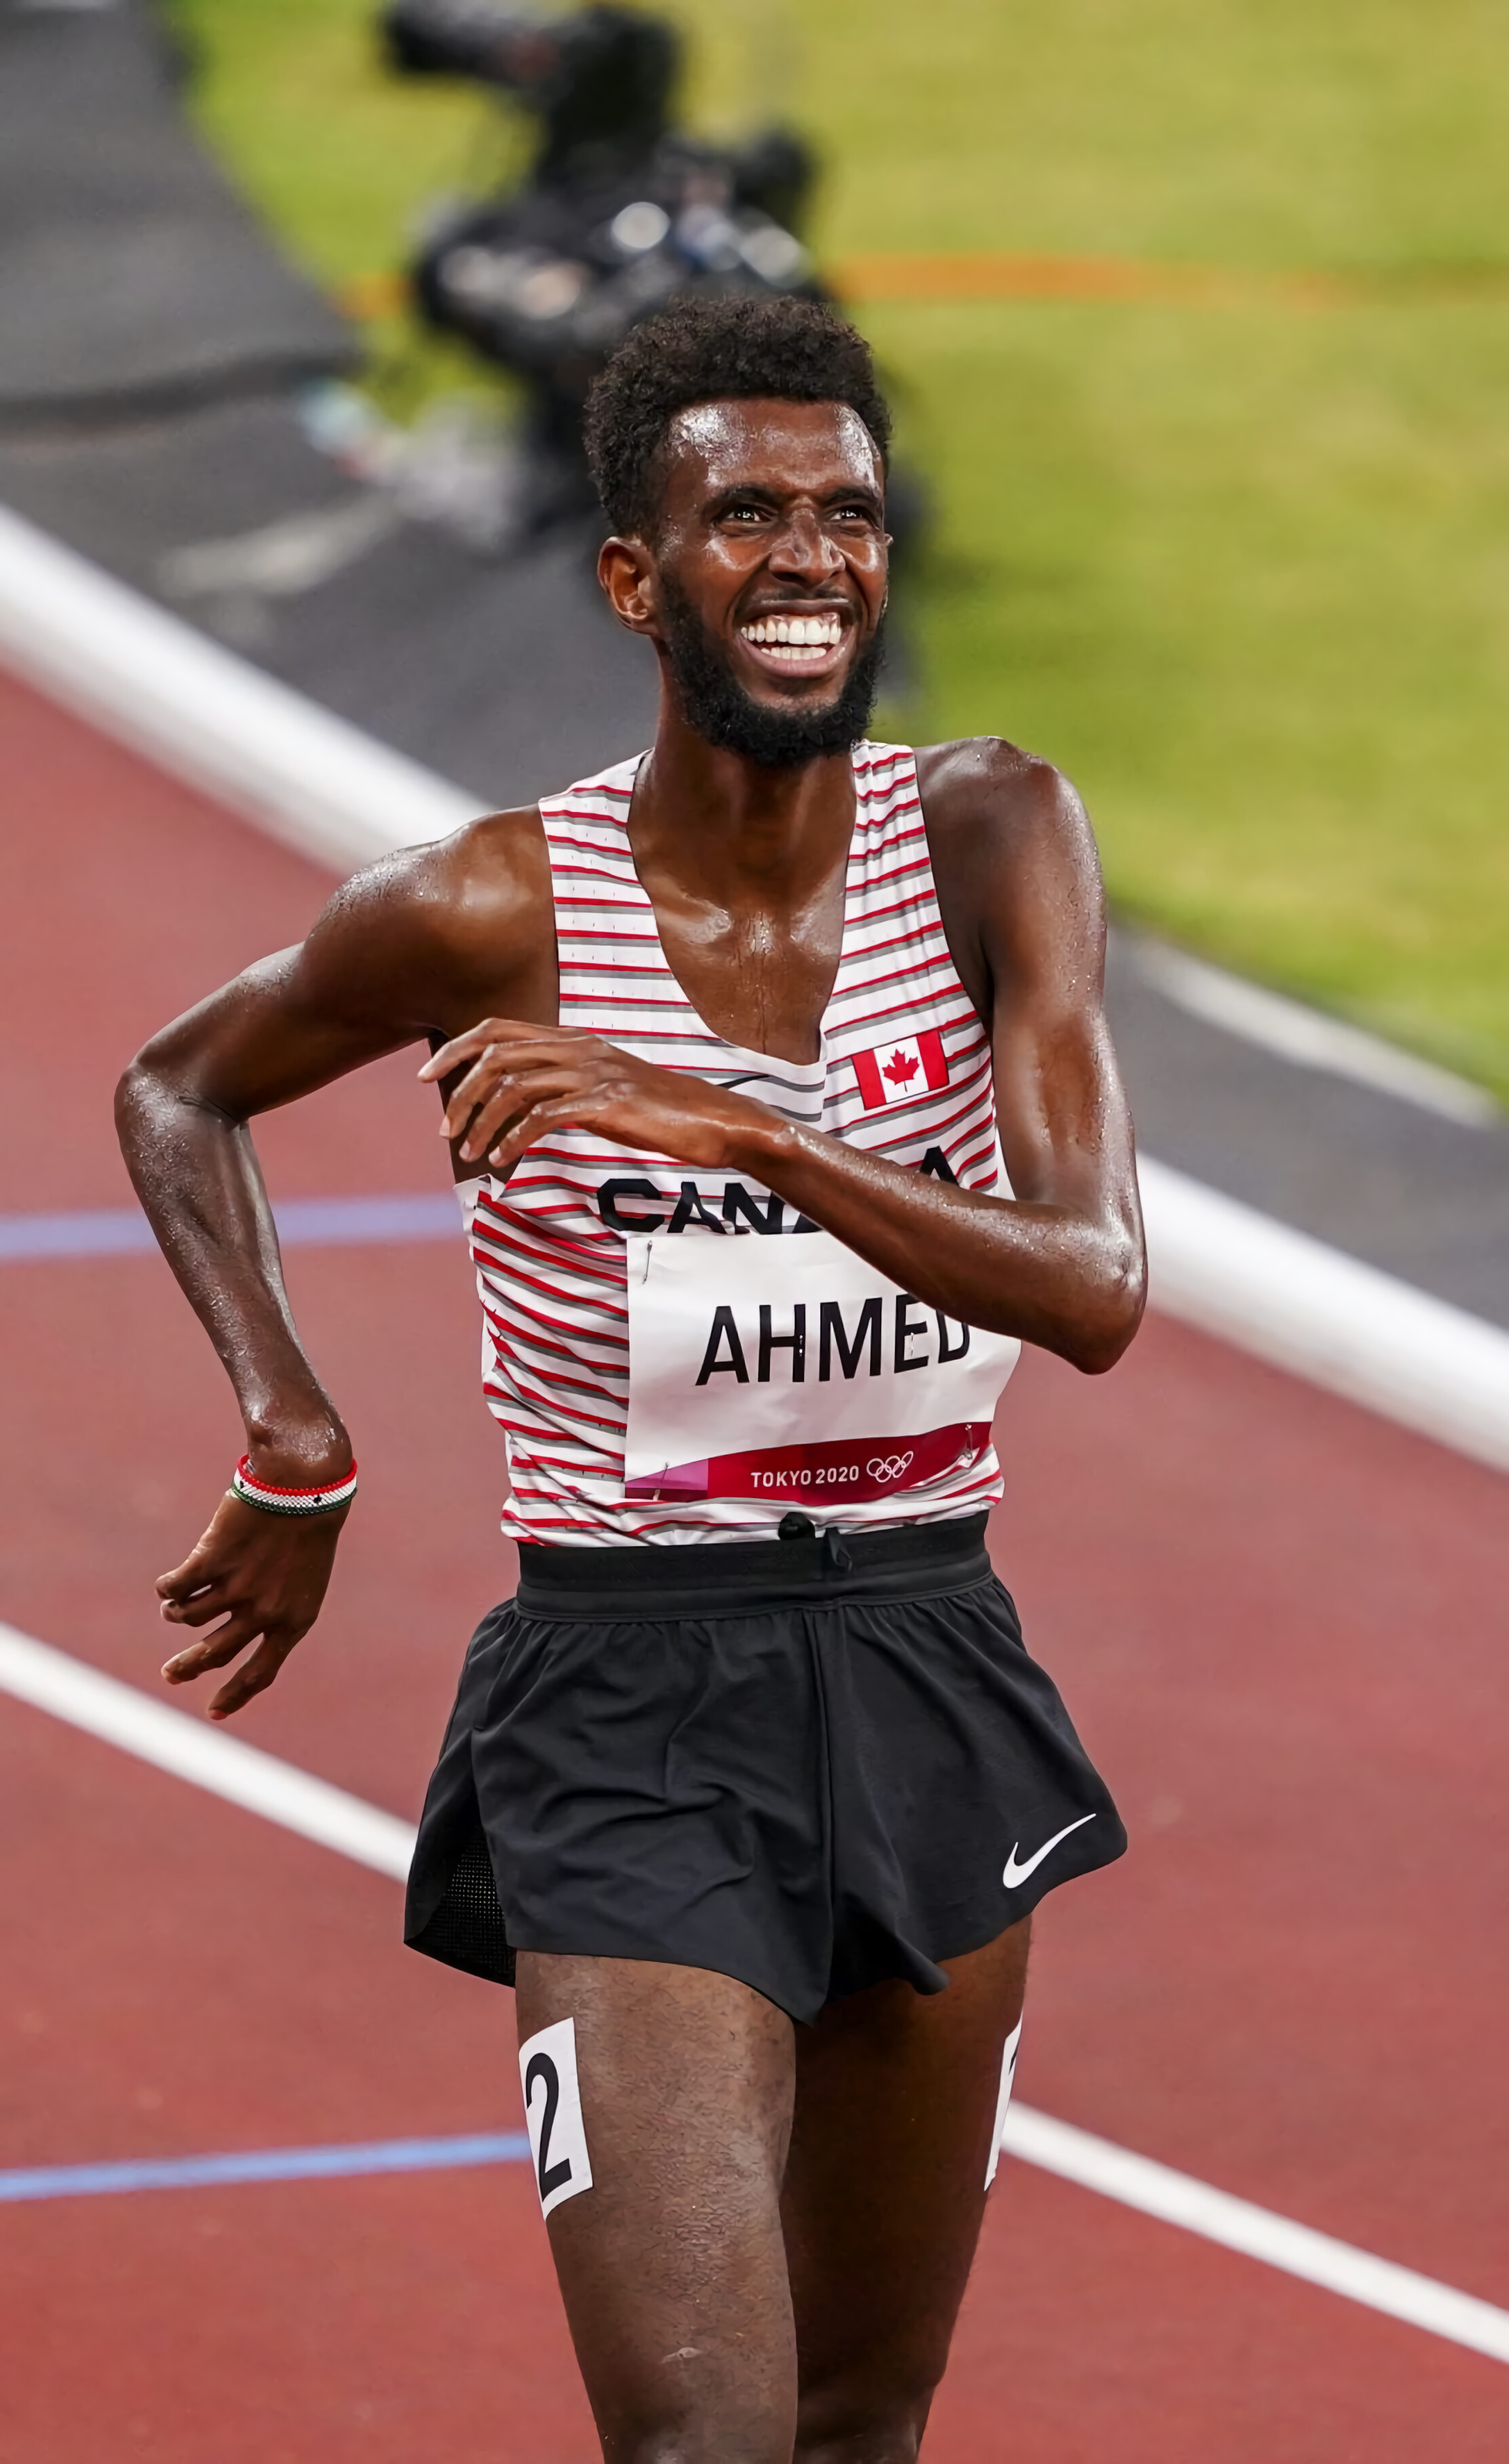 Mohammed Ahmed, Personal records, Breaking barriers, Athlete's journey, 2230x3640 HD Handy